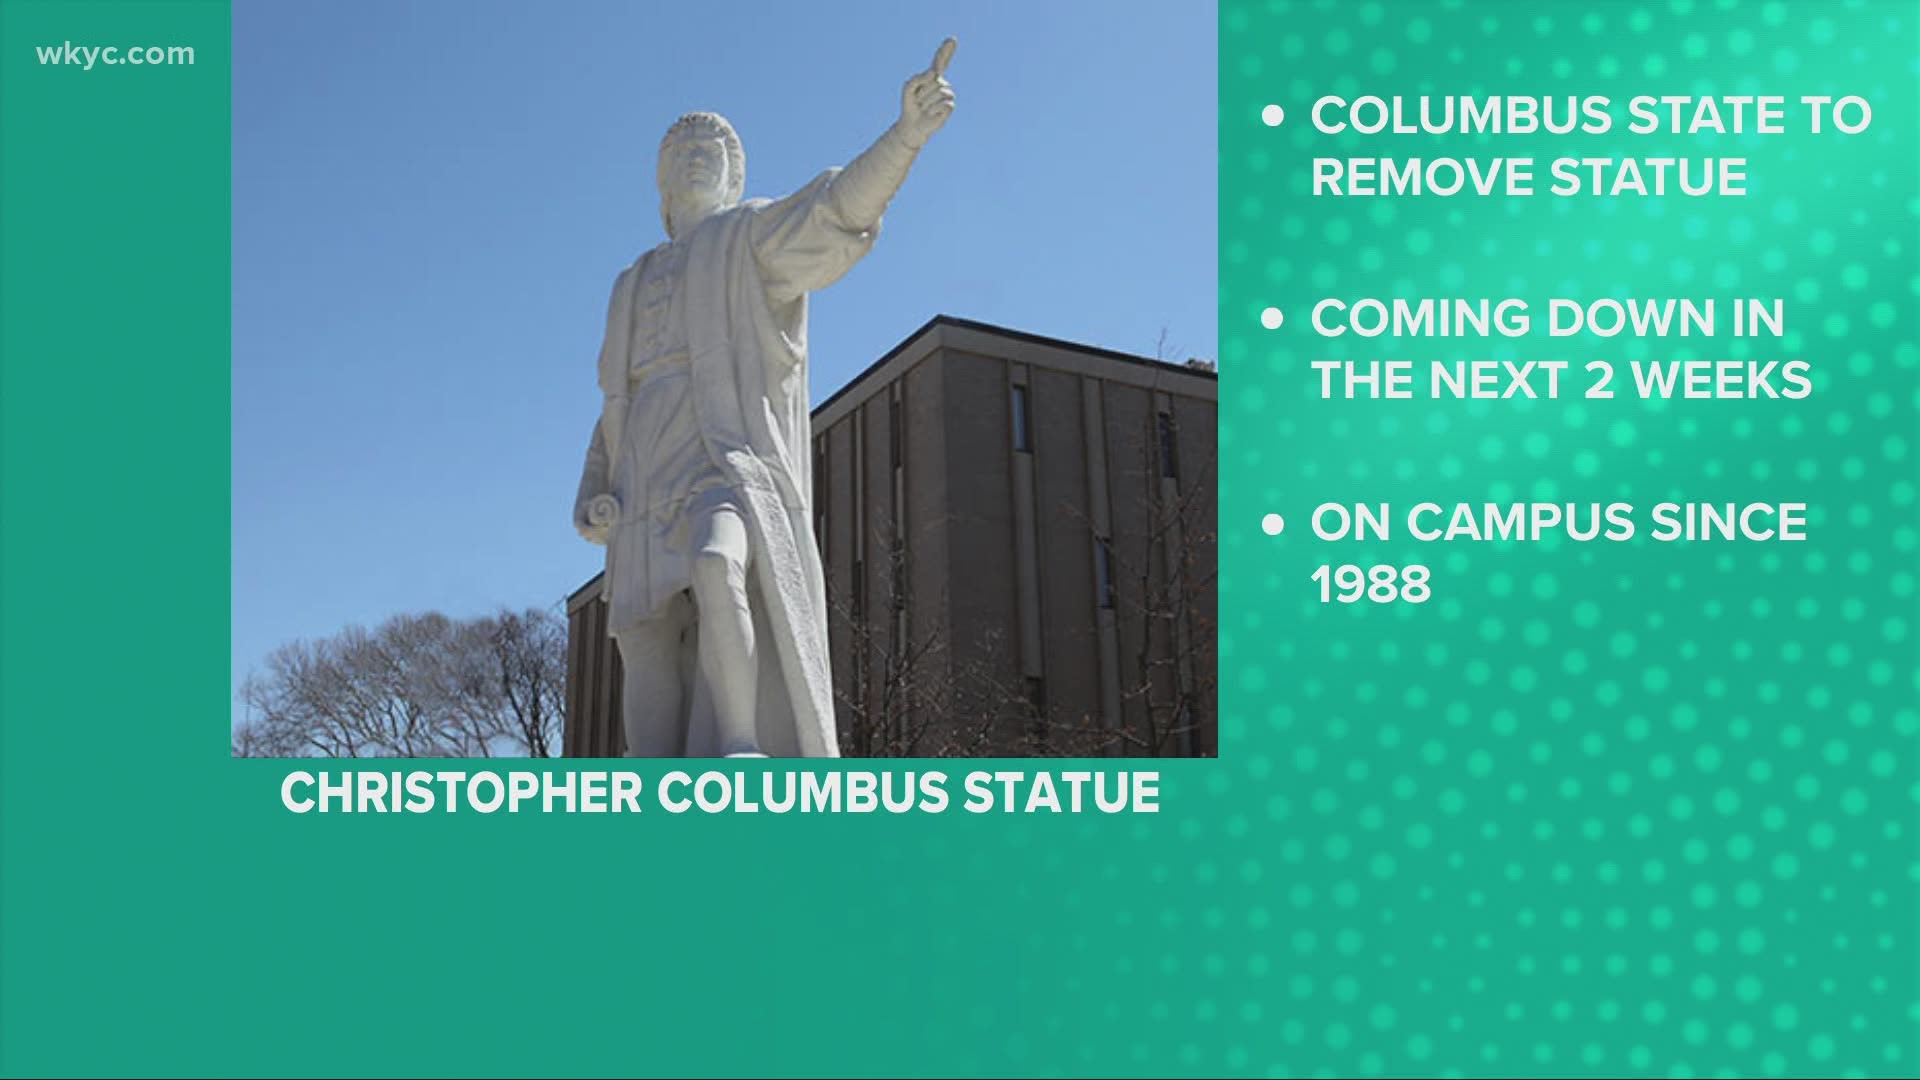 The statute has been in place for more than 3 decades. But it will now come down within the next two weeks.